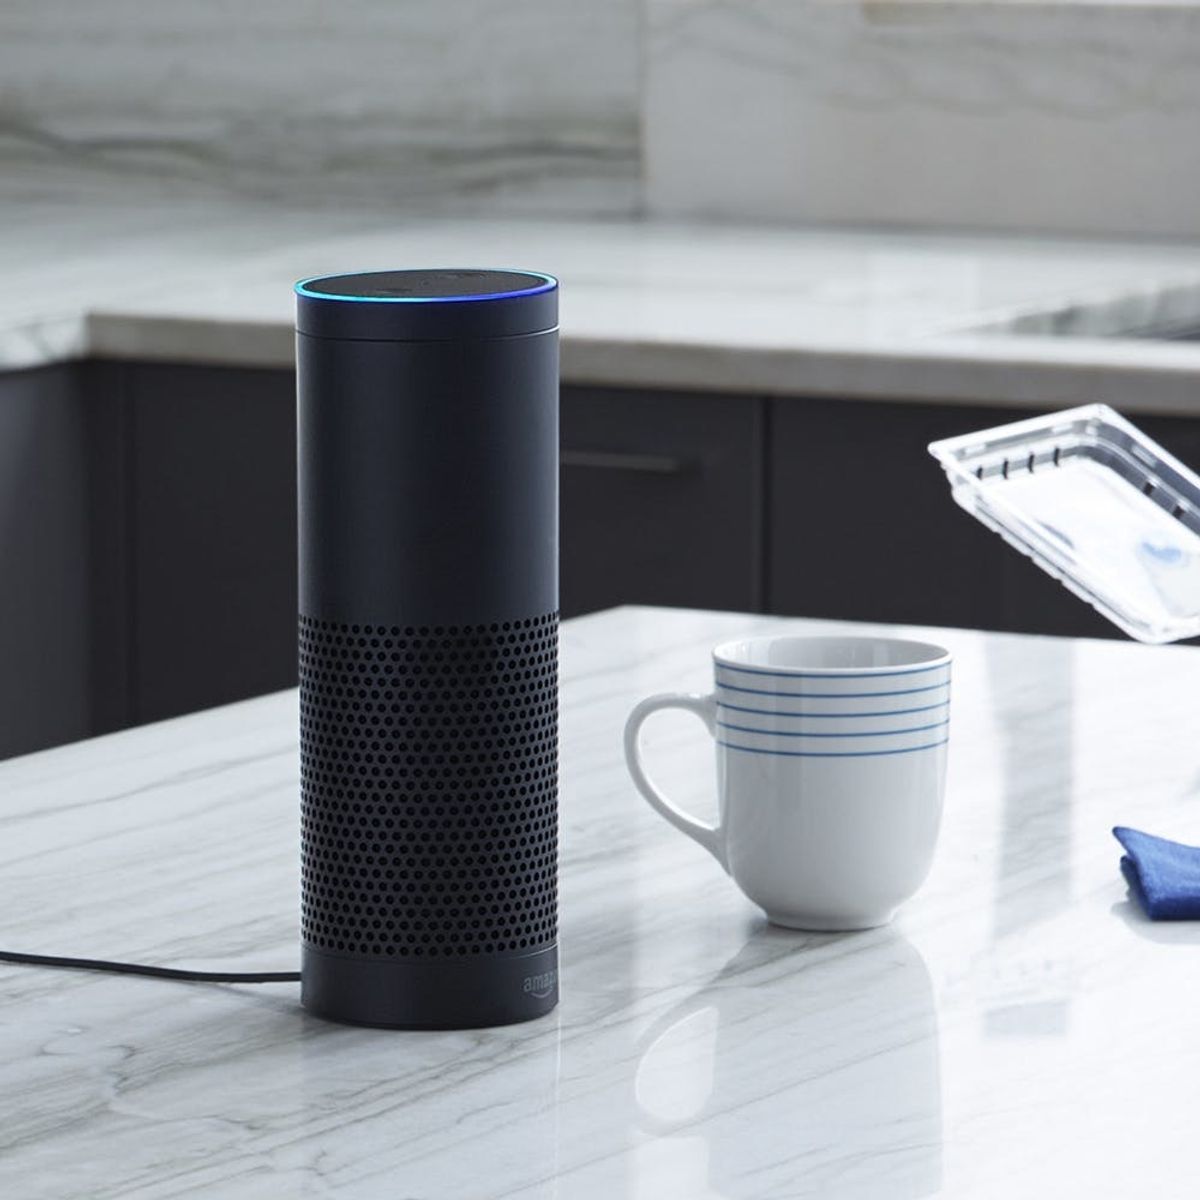 Amazon Alexa Is Growing Up at CES 2017